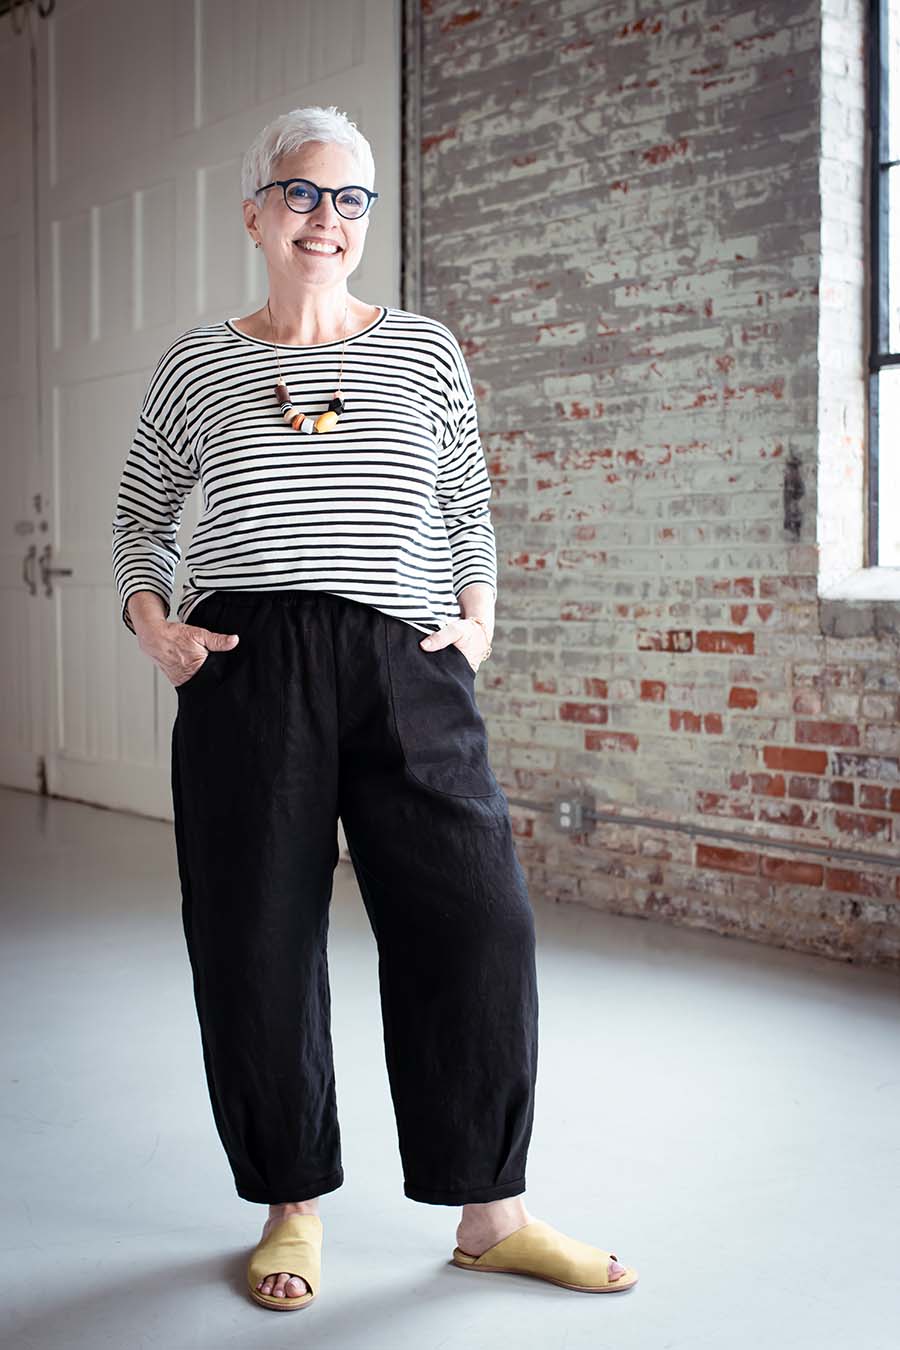 Cindy wears black chanterelle pants and a striped top